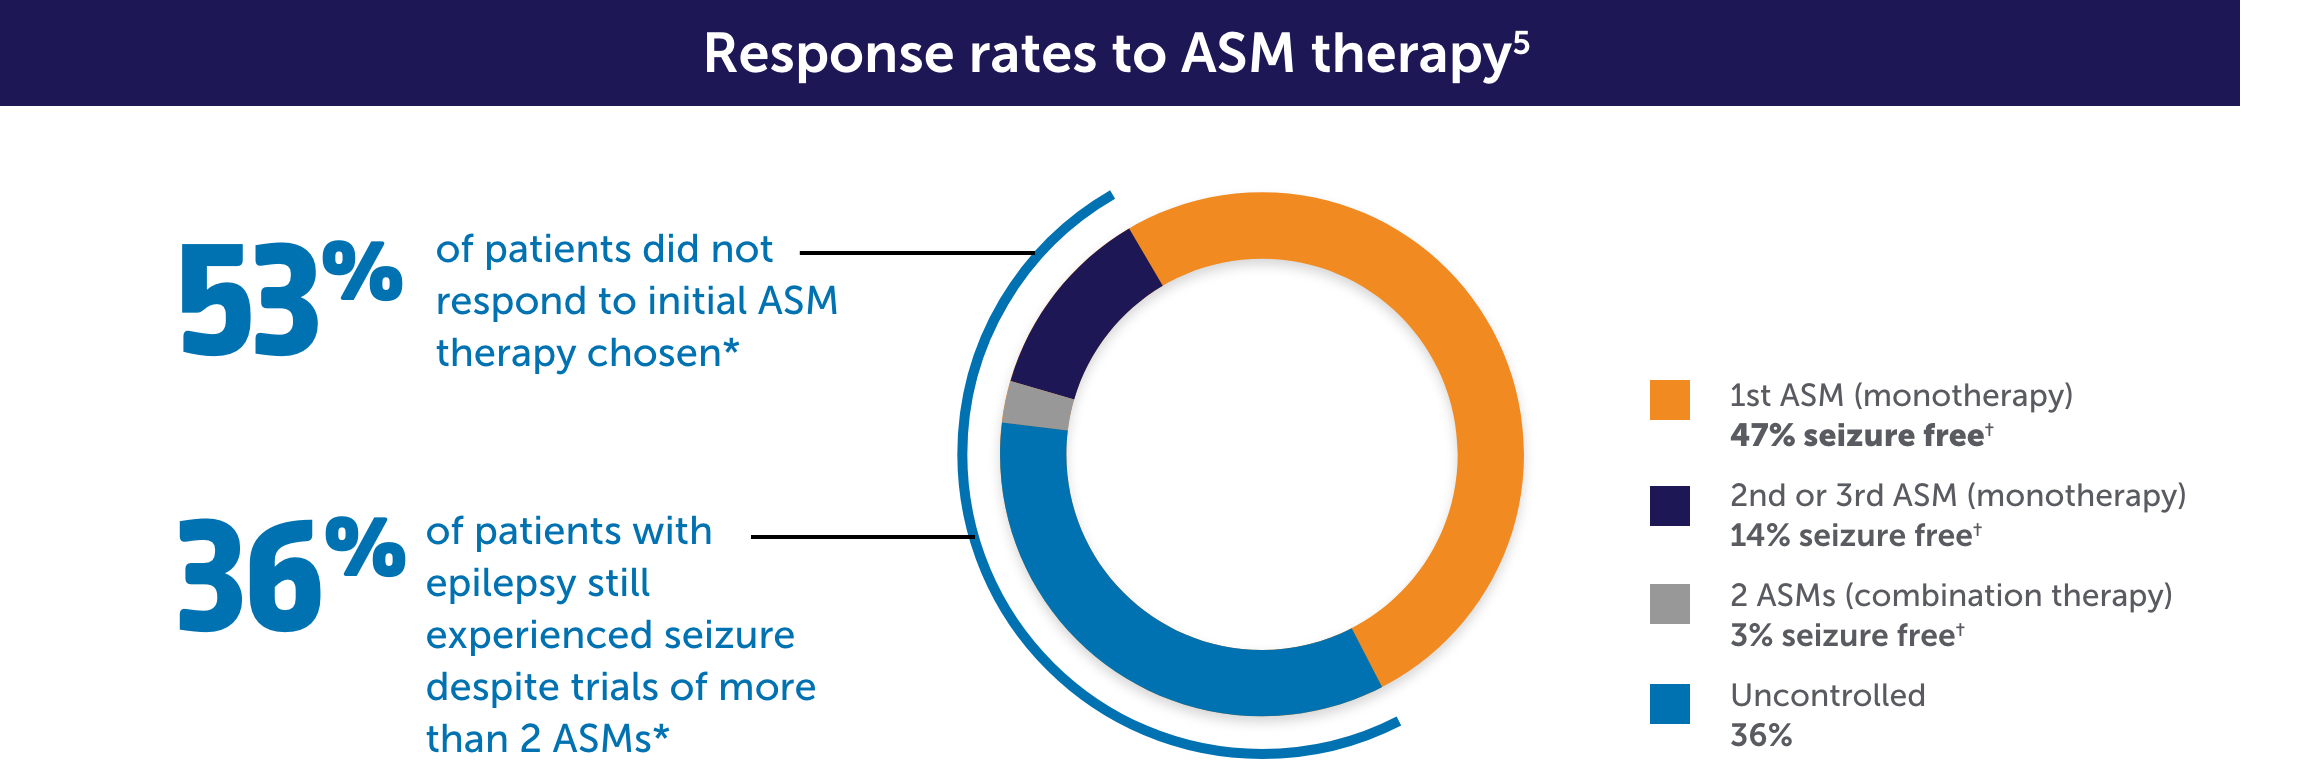 Response rates to ASM therapy: 53% of patients did not respond to initial ASM therapy chosen. 36% of patients with epilepsy still experienced seizure despite trials of more than 2 ASMs.